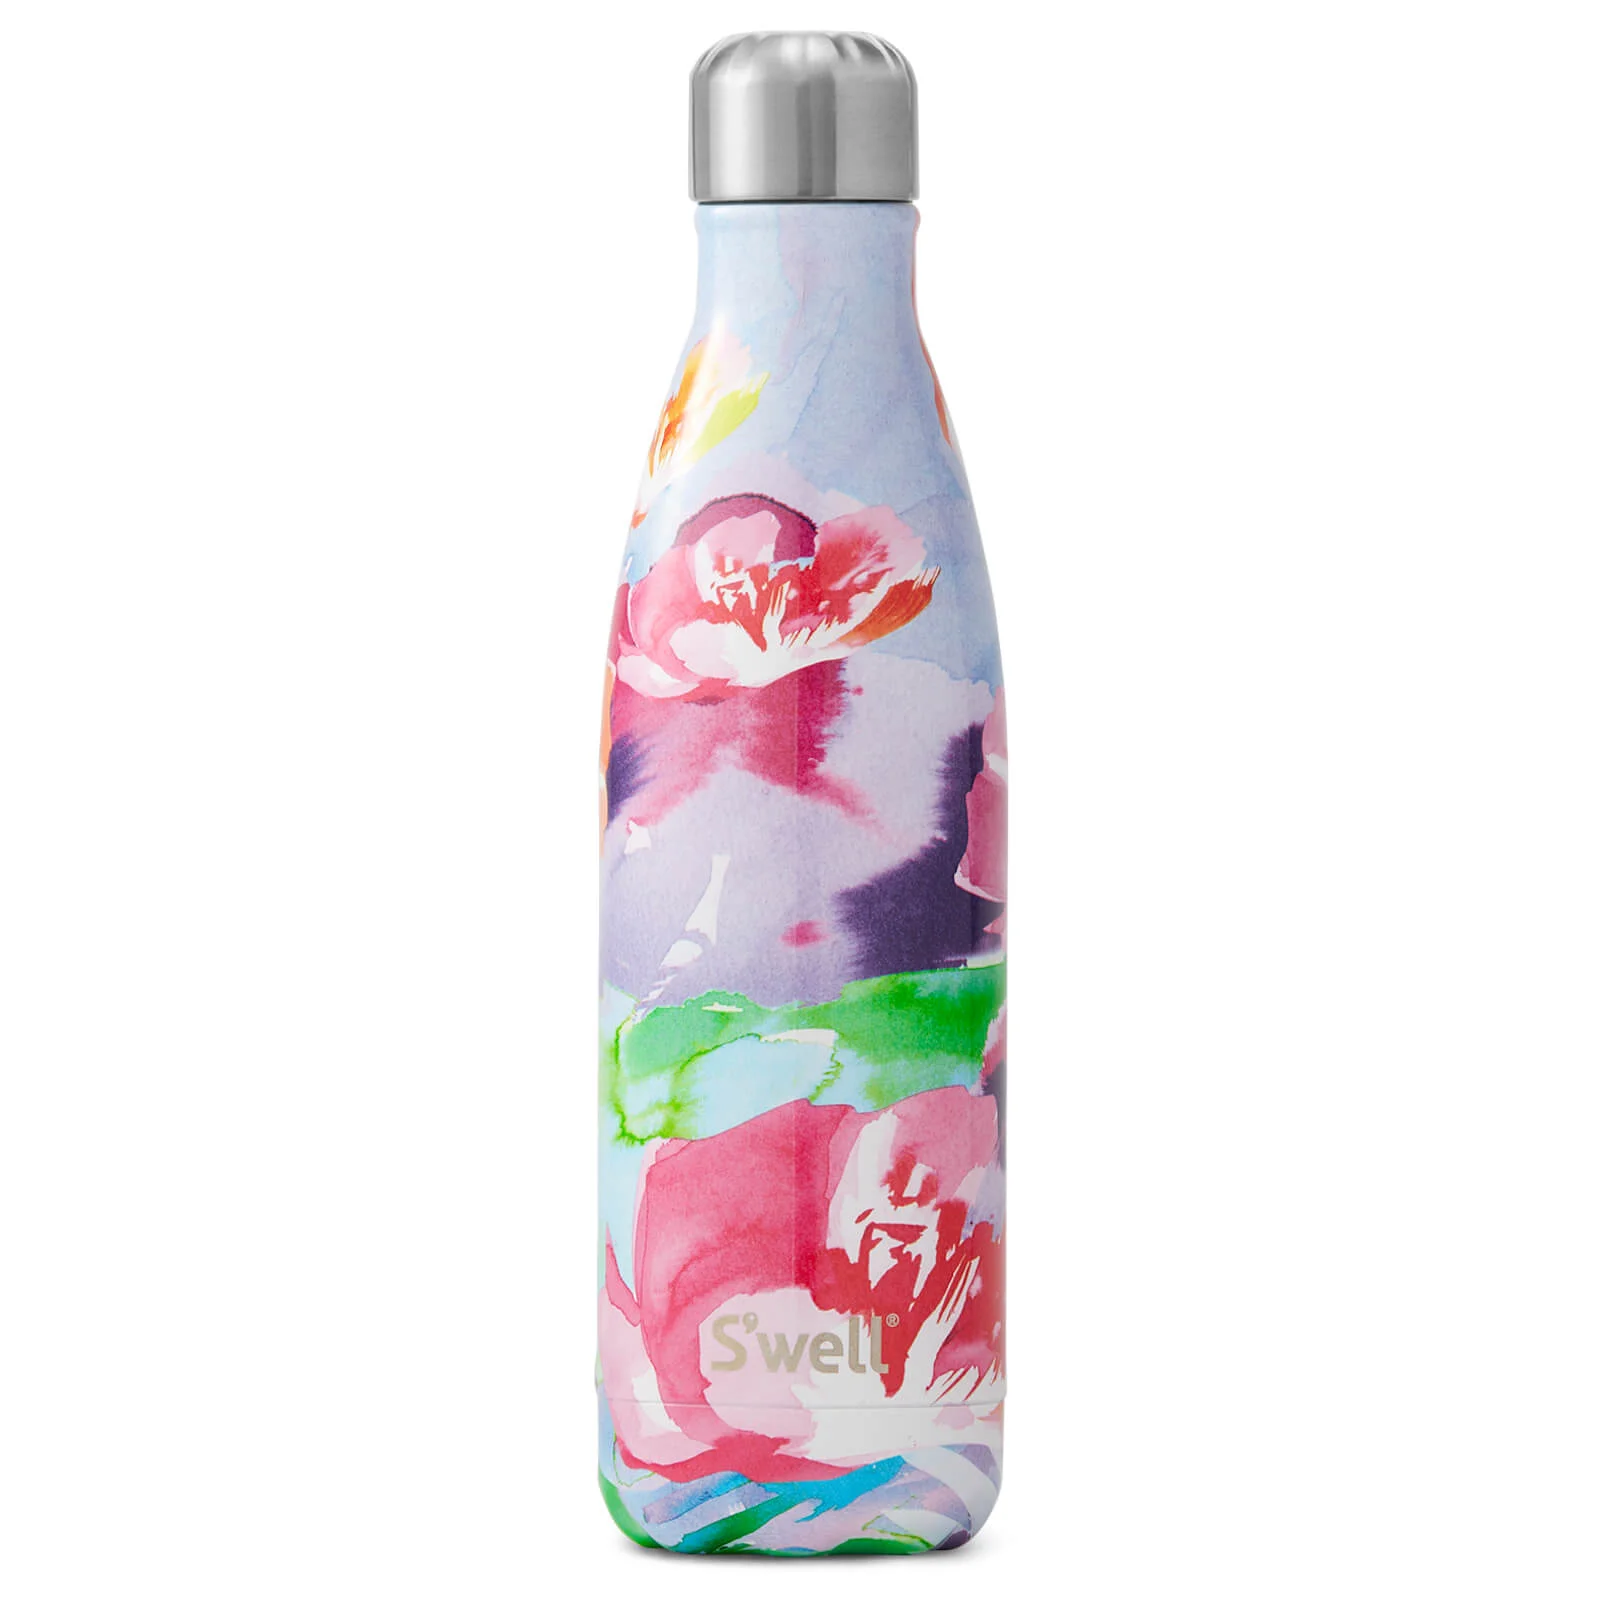 S'well Lilac Posy Water Bottle - 500ml Image 1